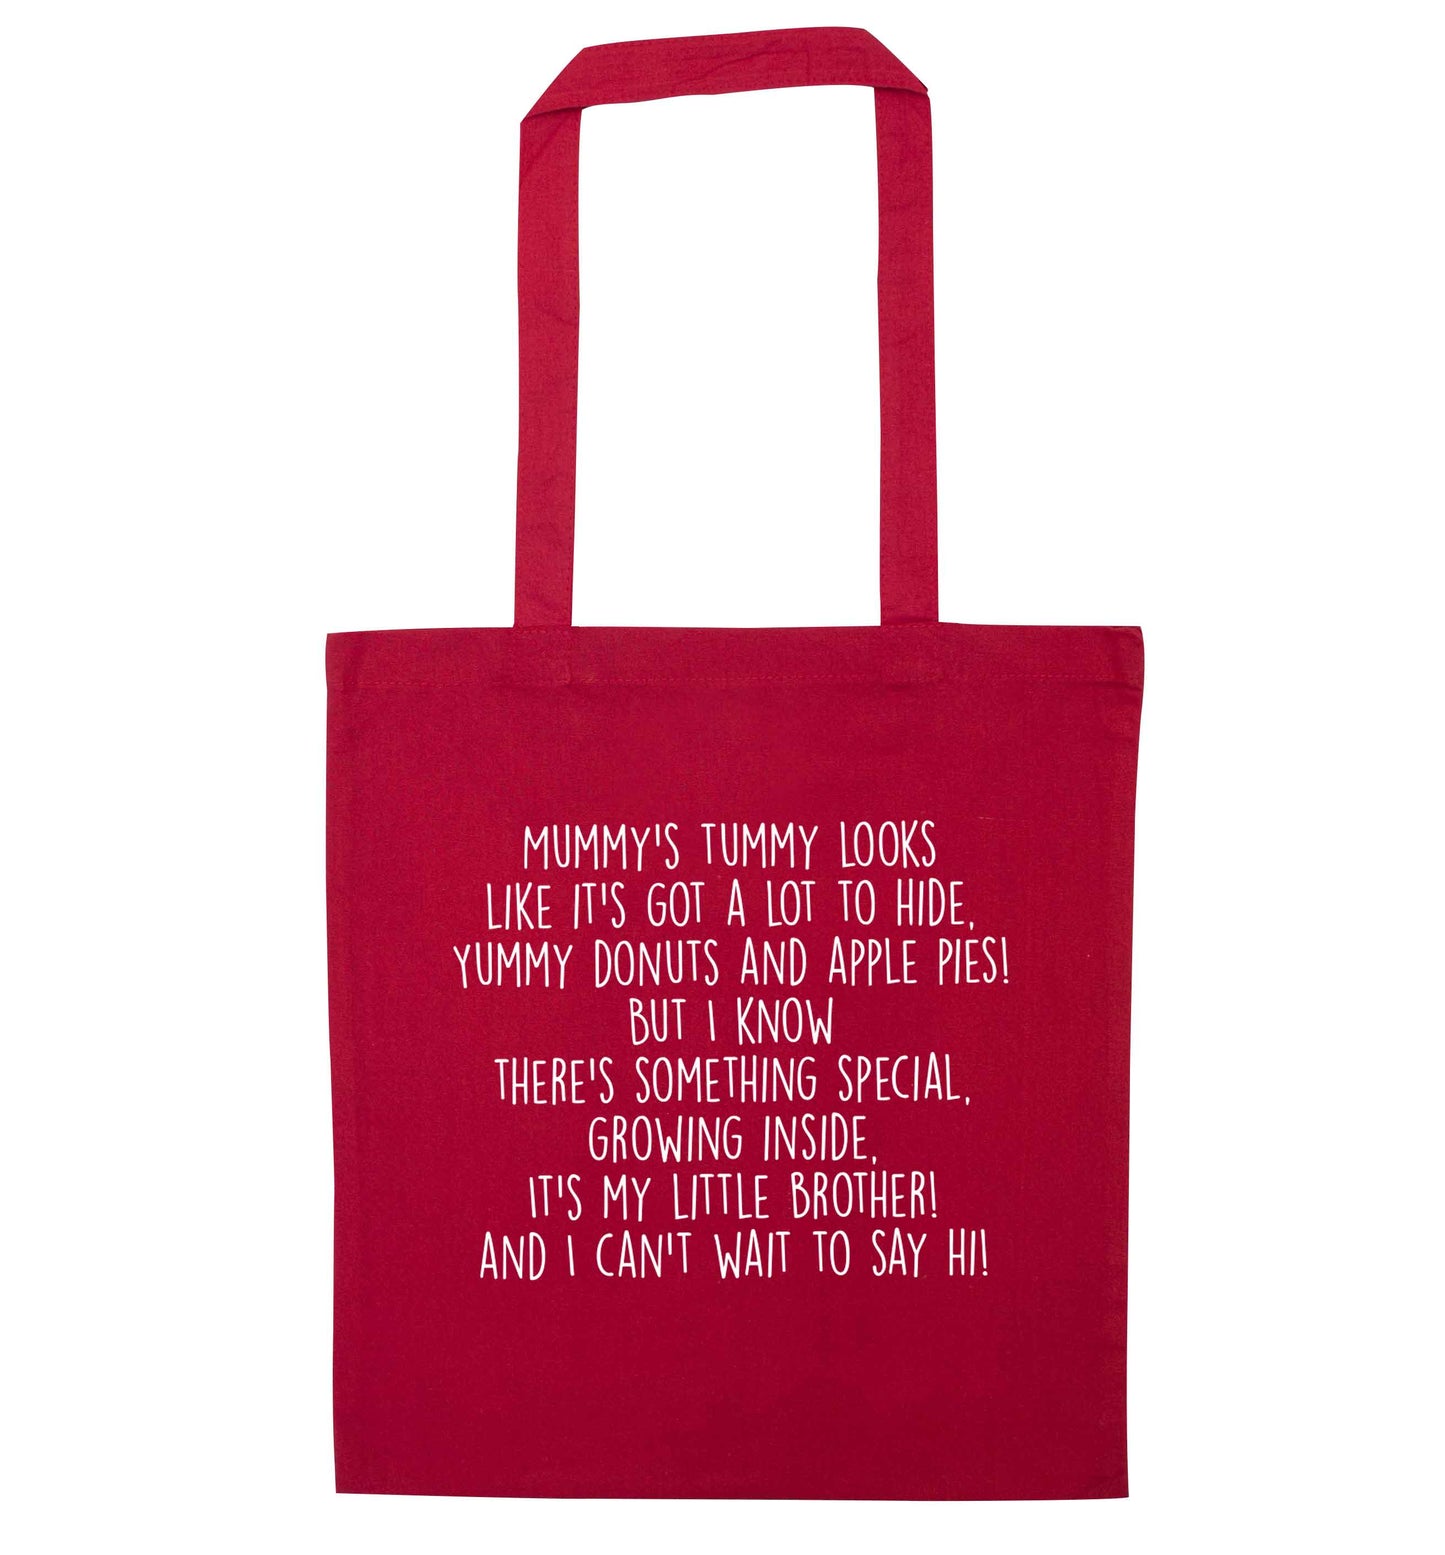 Something special growing inside it's my little brother I can't wait to say hi! red tote bag